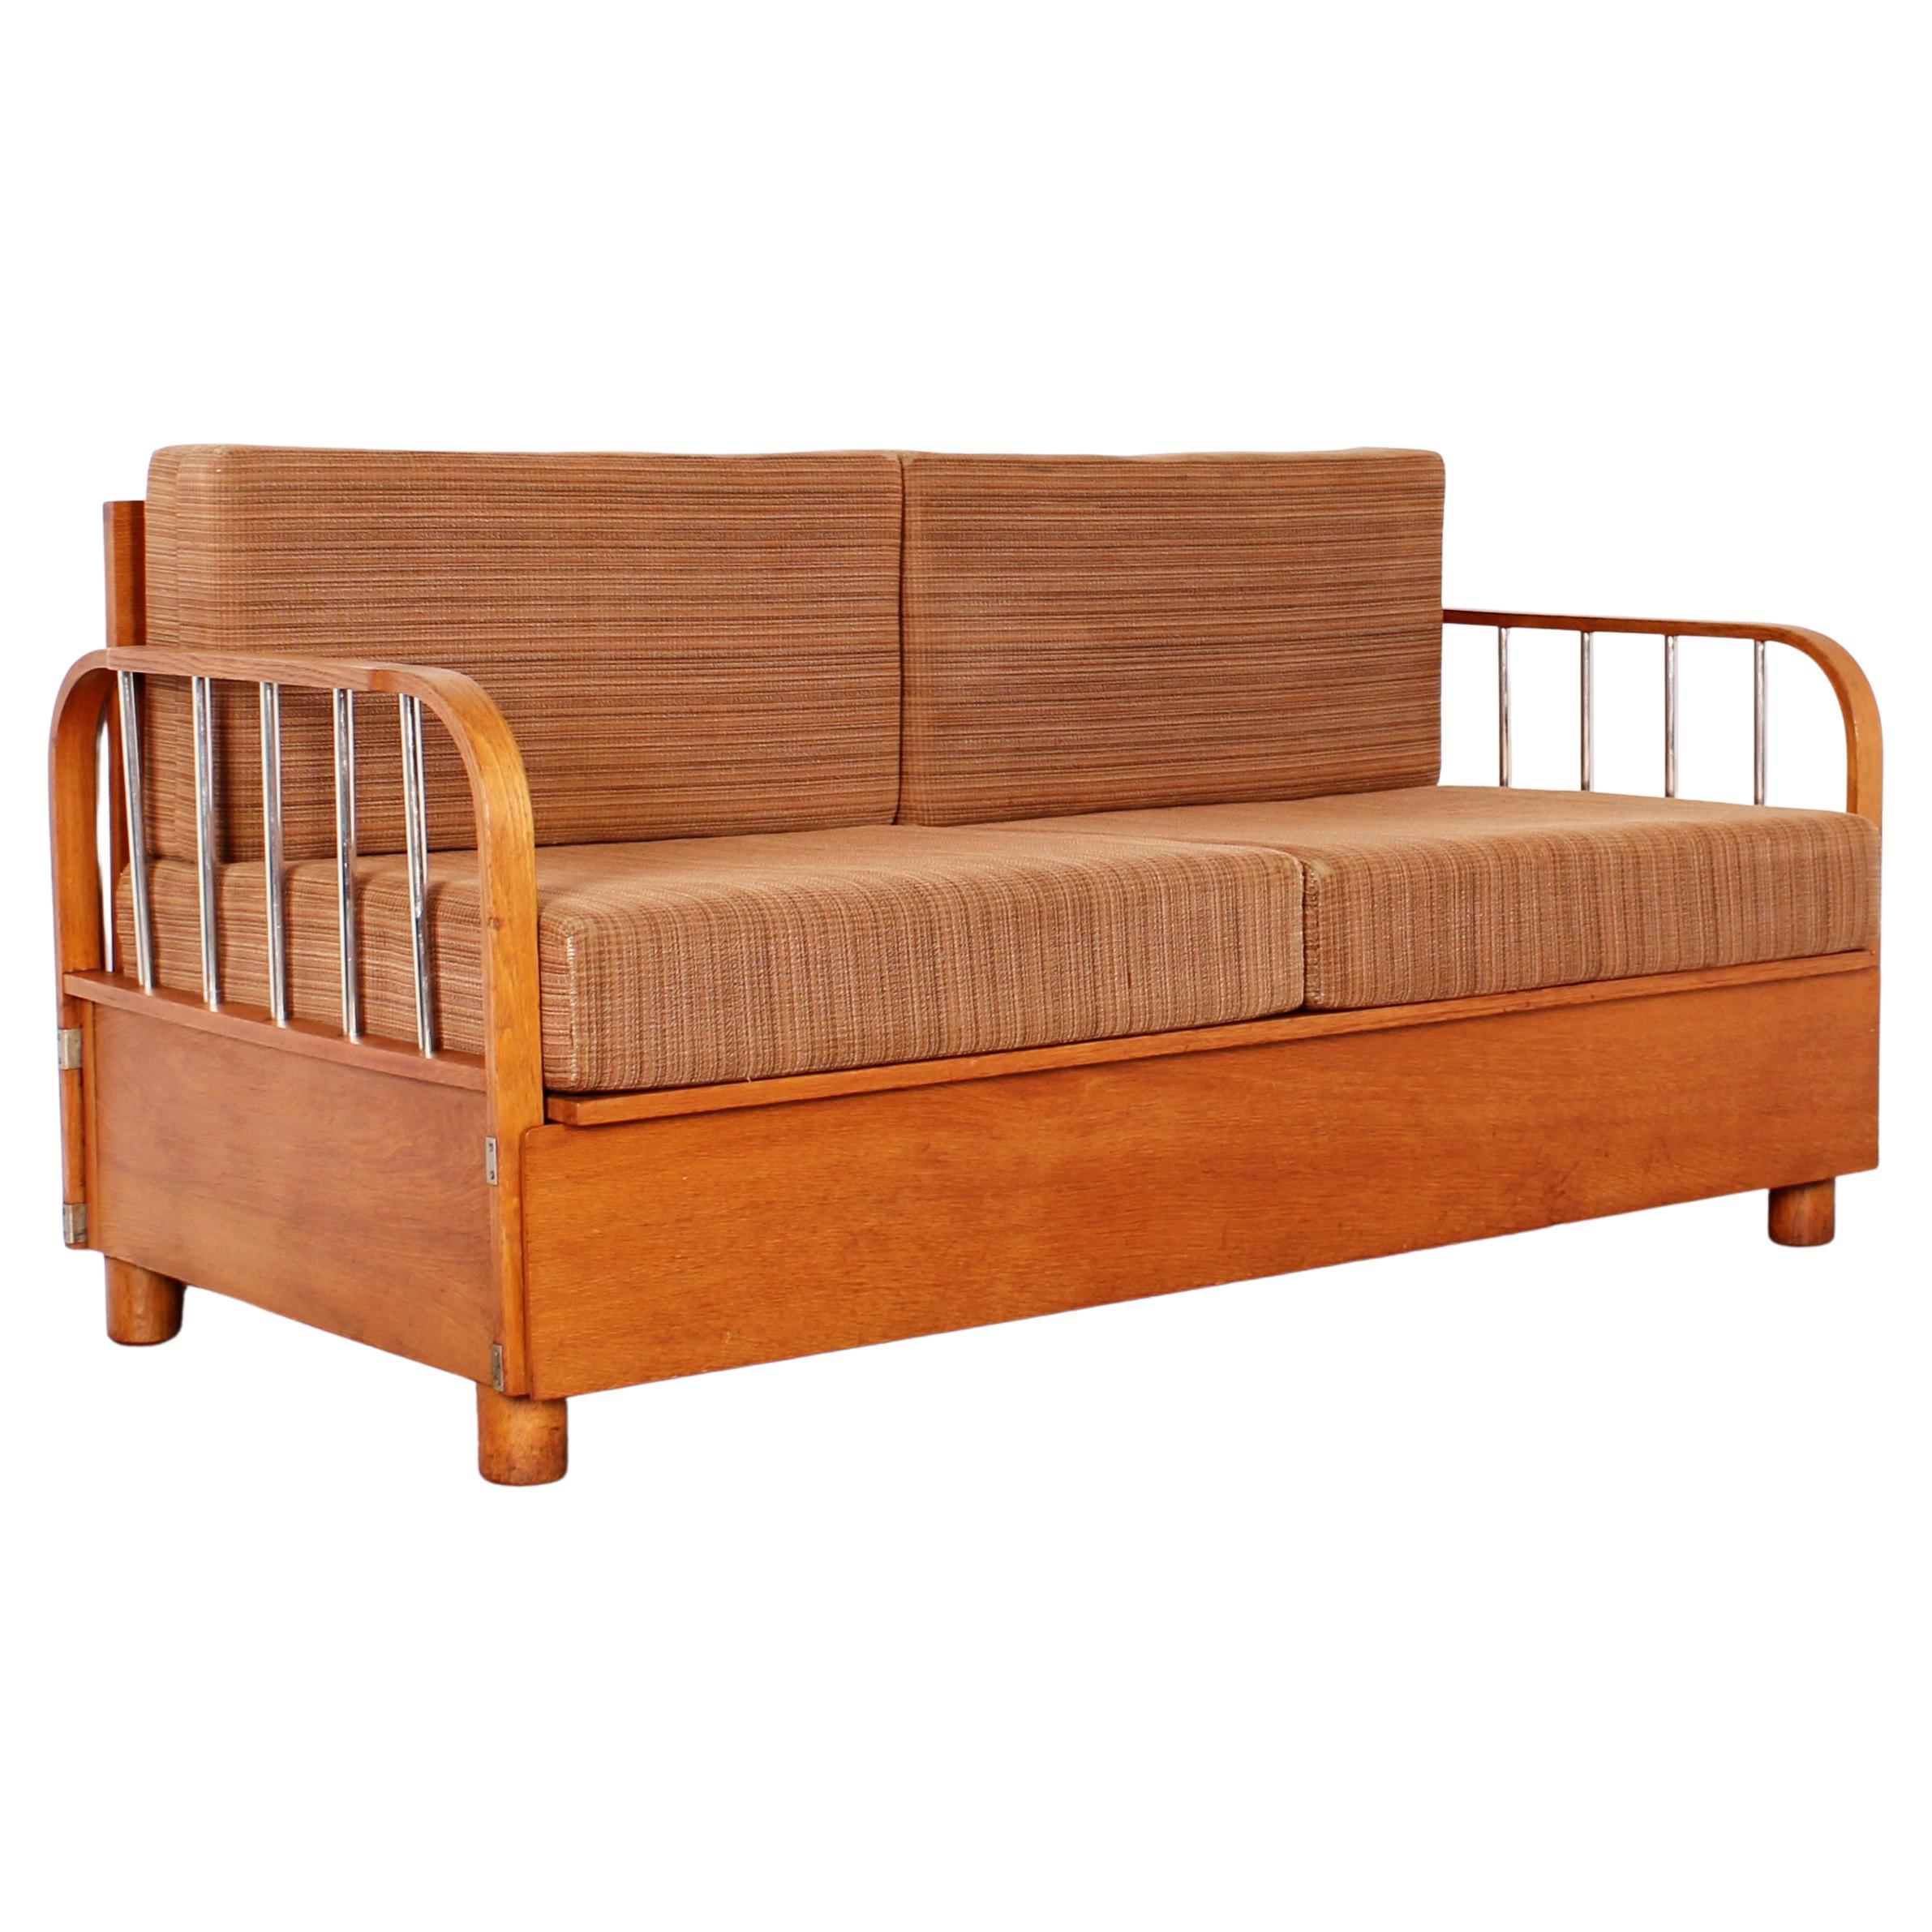 Functionalist Convertible Sofa by Jindřich Halabala, Model No. H-215, ca. 1930s For Sale